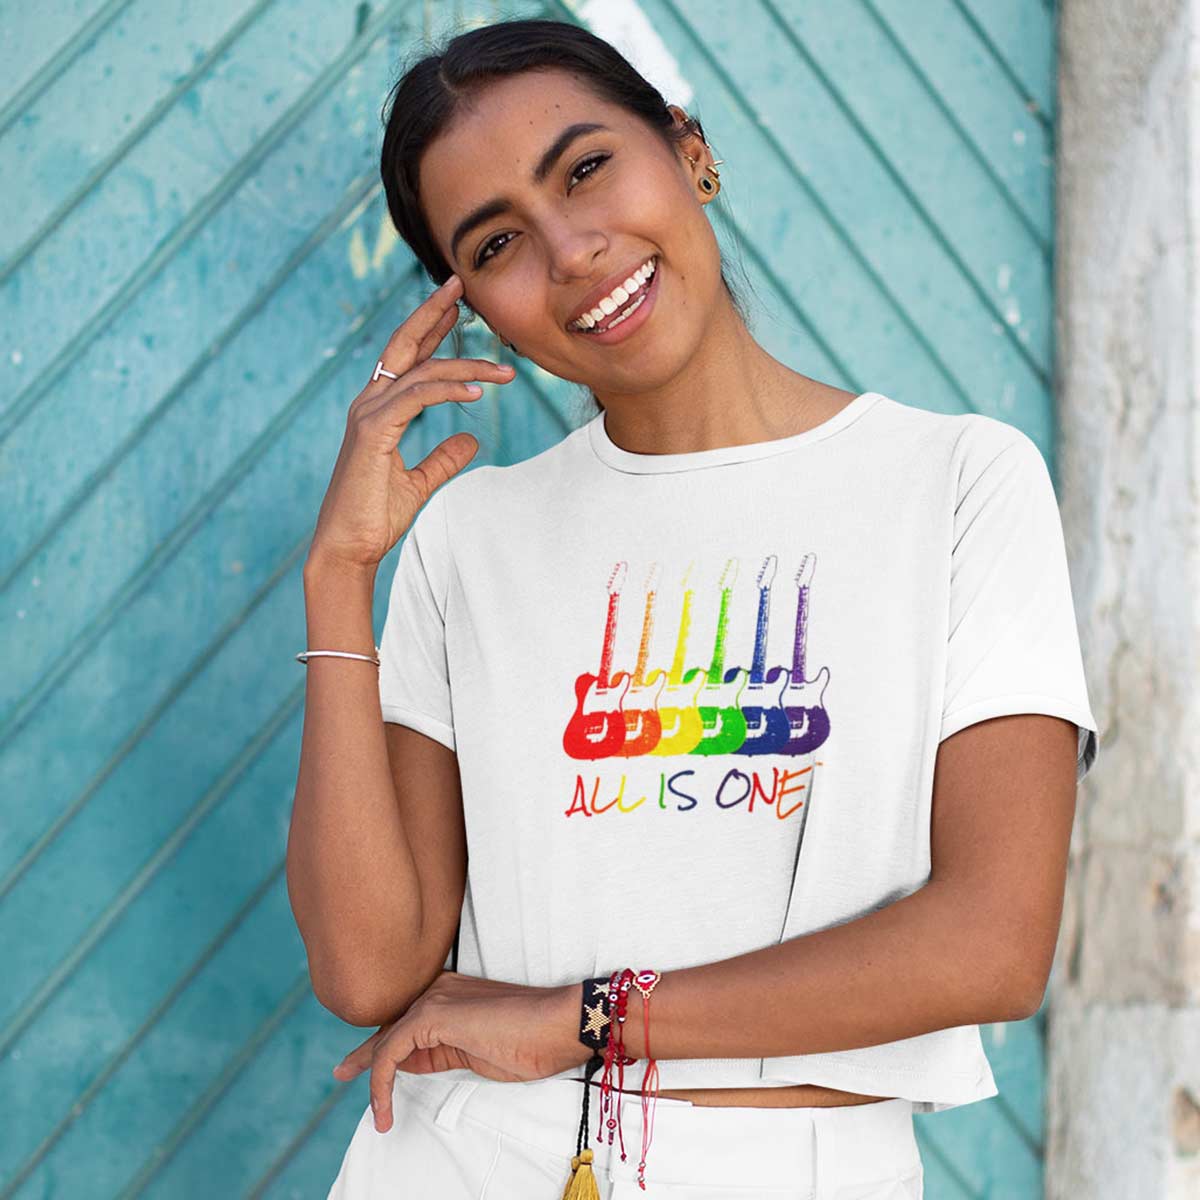 Retro Cropped Top Tee with Rainbow Guitars All Is One Design image number 4